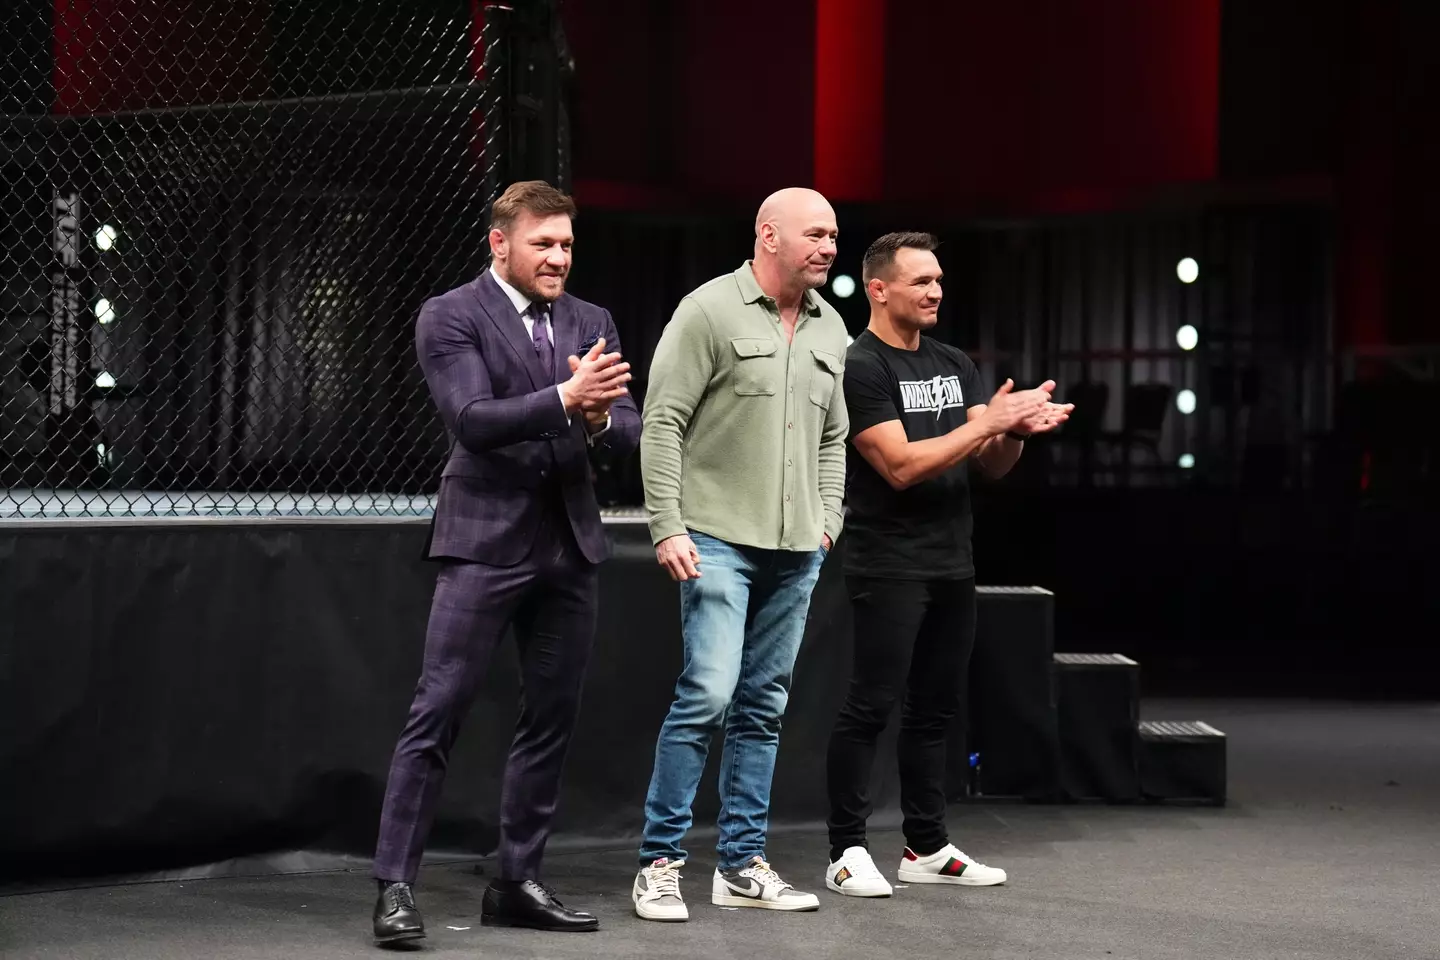 Conor McGregor alongside Dana White and Michael Chandler during The Ultimate Fighter. Image: Getty